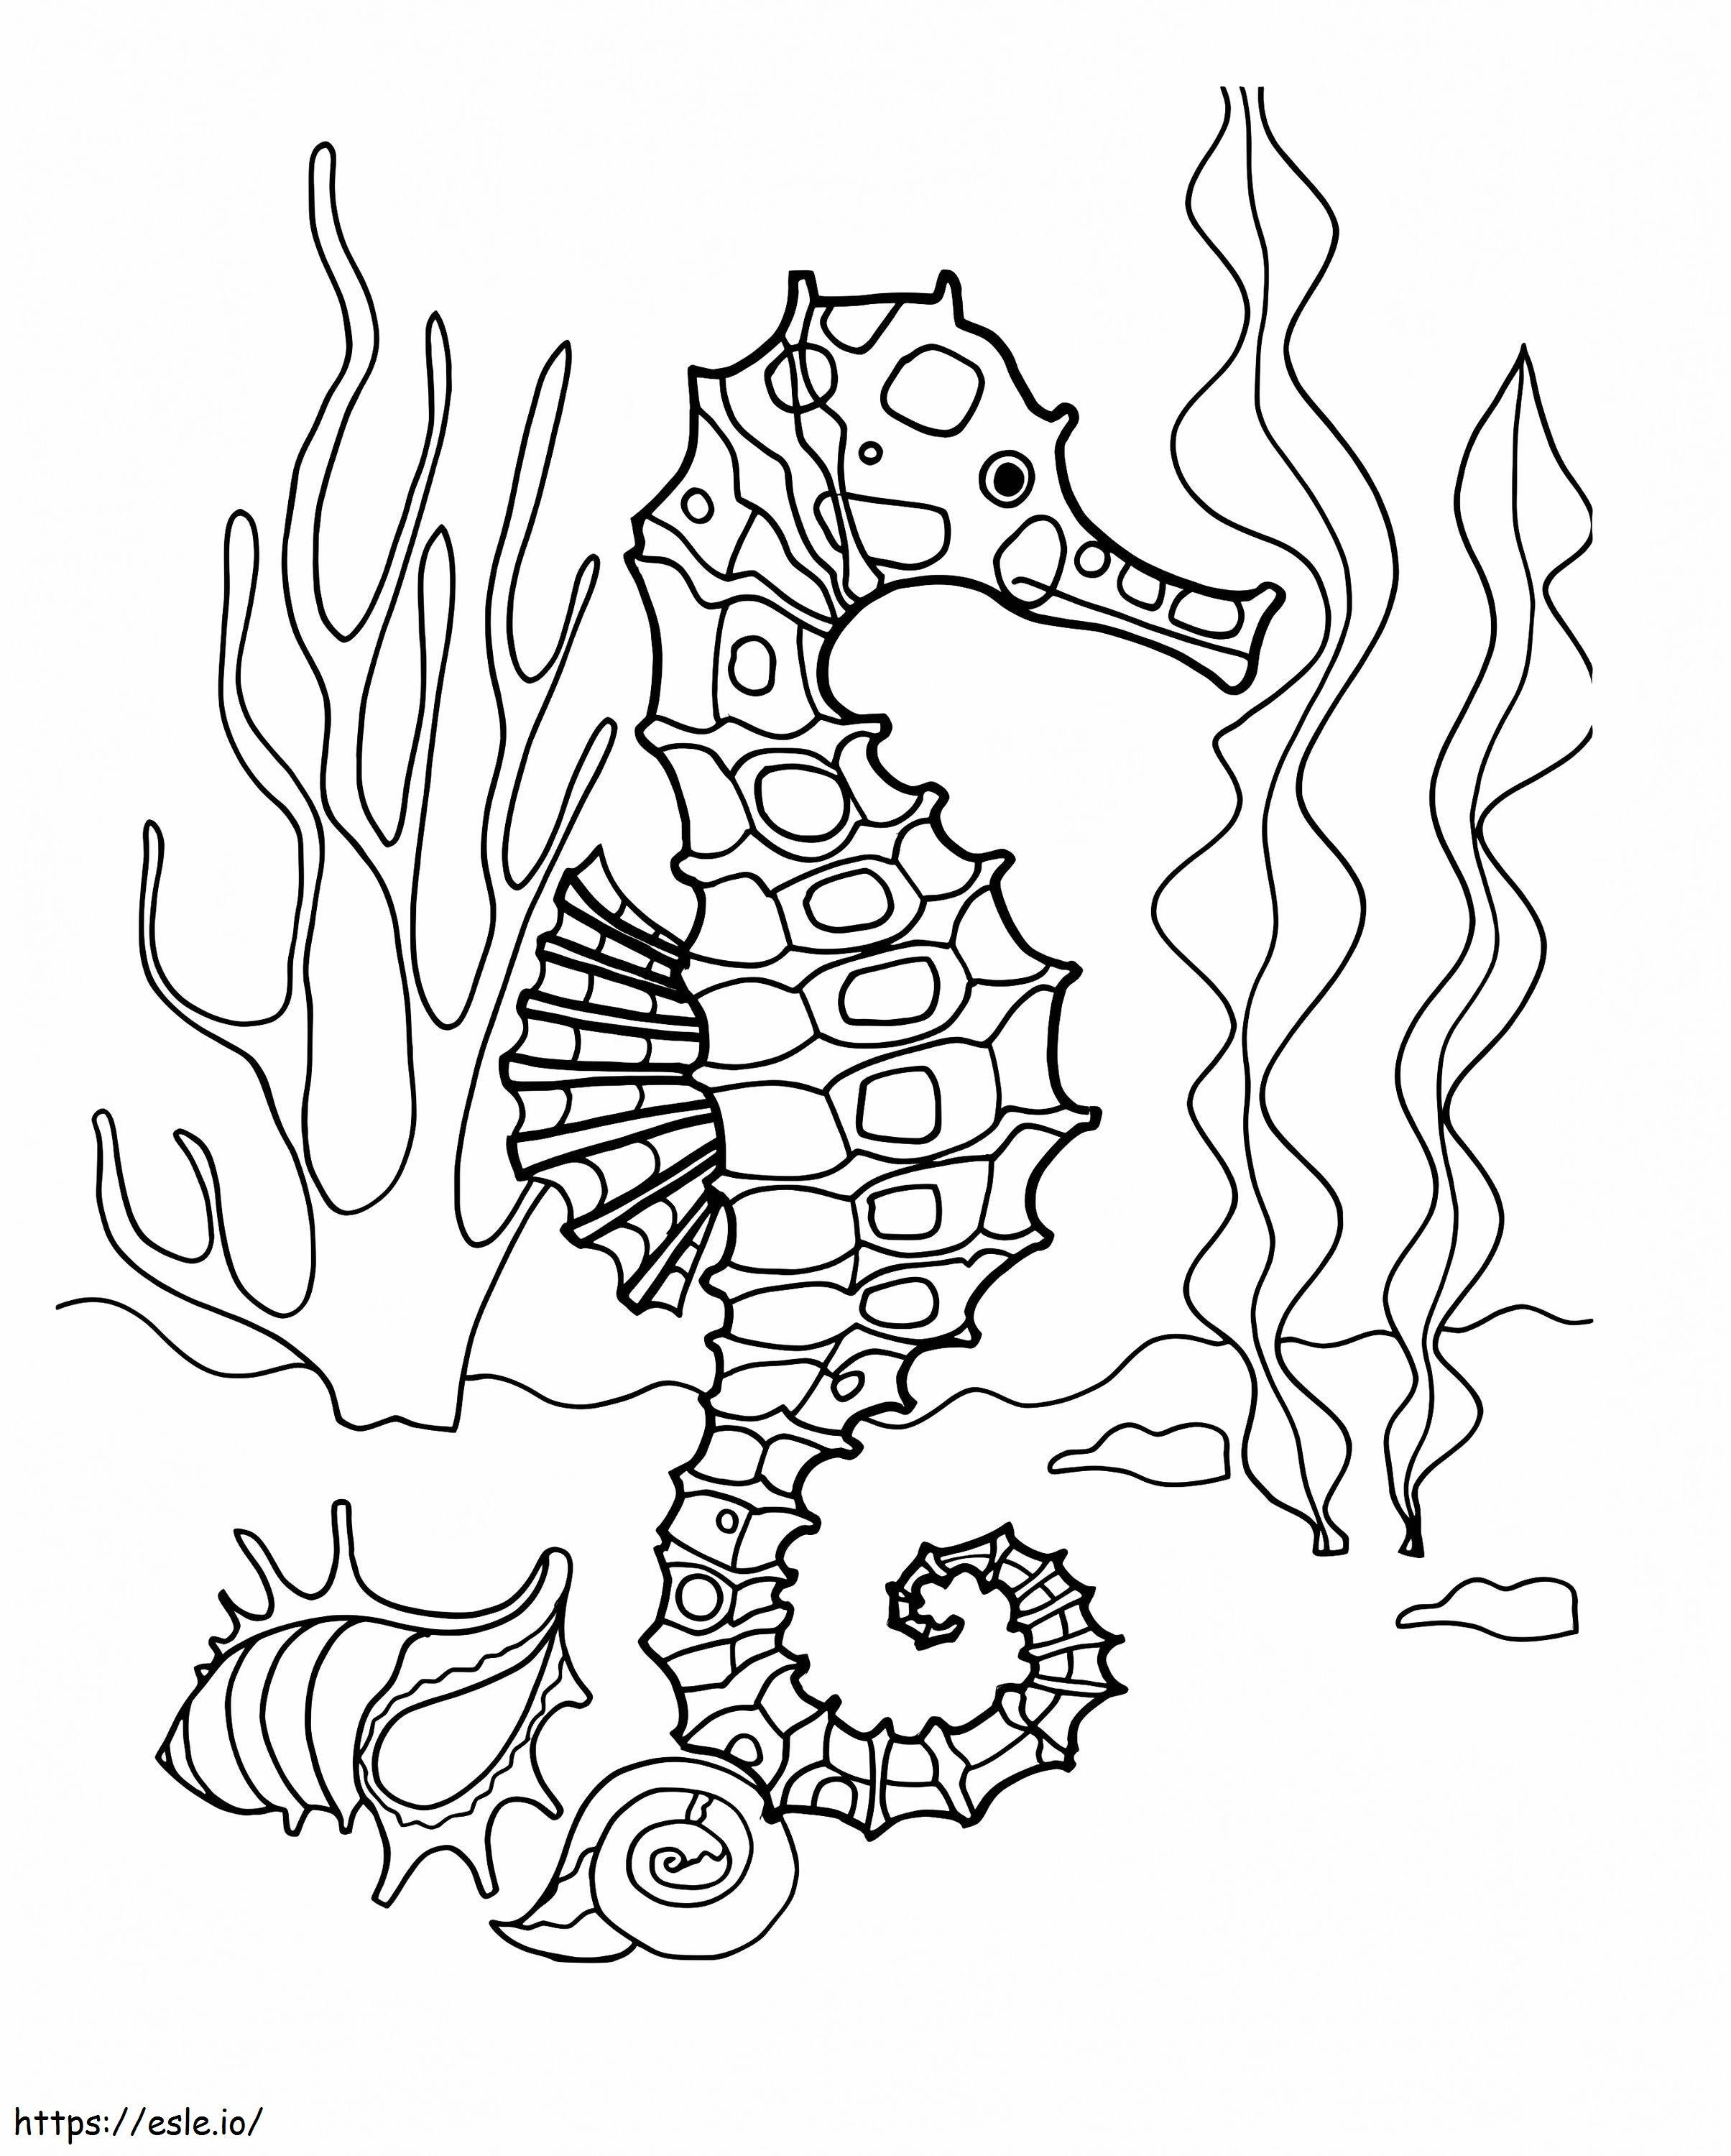 Cool Seahorse coloring page